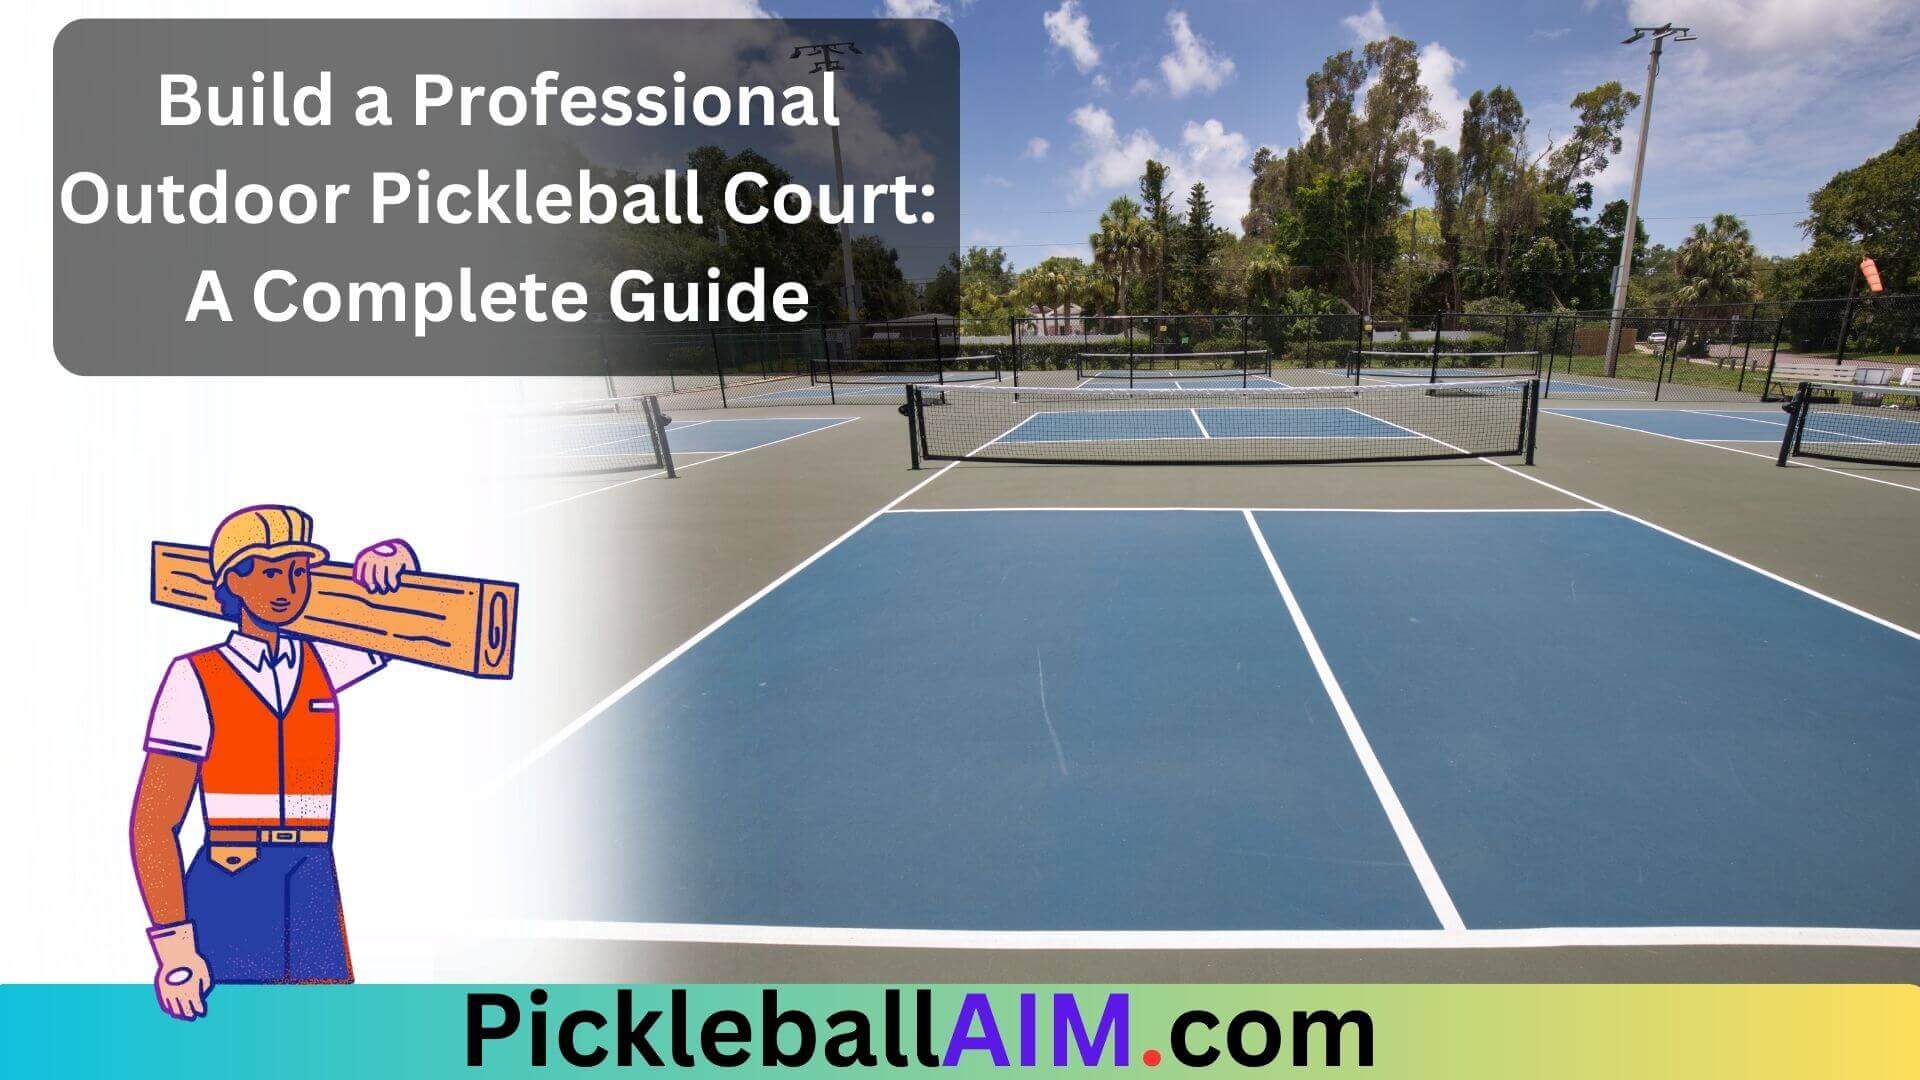 Build a Professional Outdoor Pickleball Court A Complete Guide for pickleball